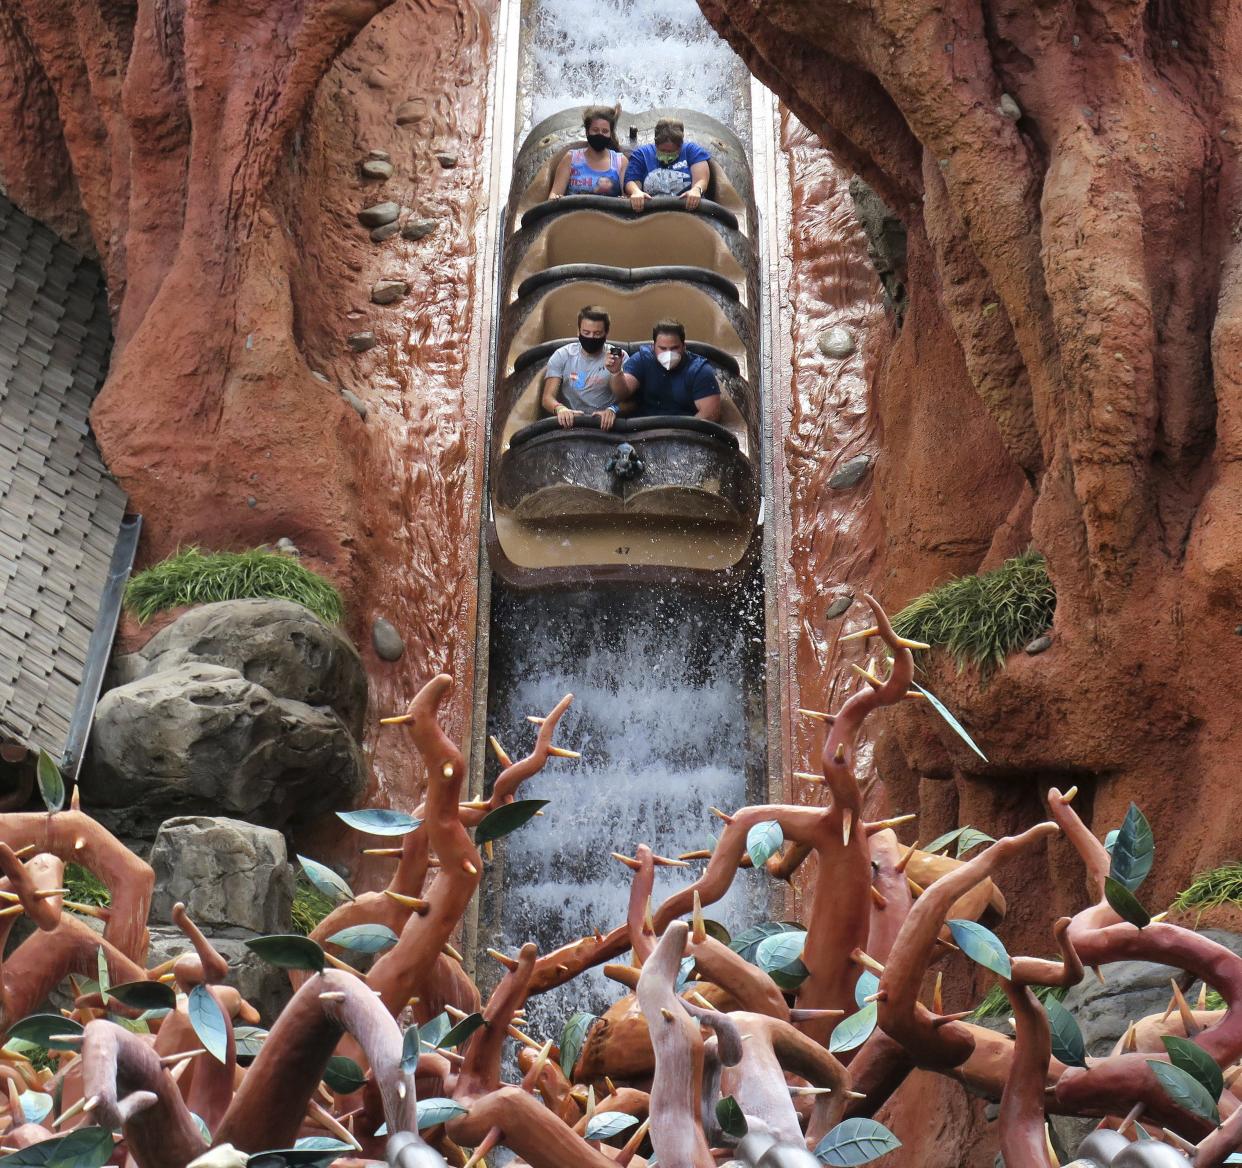 Guests wear masks as required to attend the official reopening day of the Magic Kingdom at Walt Disney World while taking the big plunge on Splash Mountain at the park in Lake Buena Vista, Fla., on Saturday, July 11, 2020.